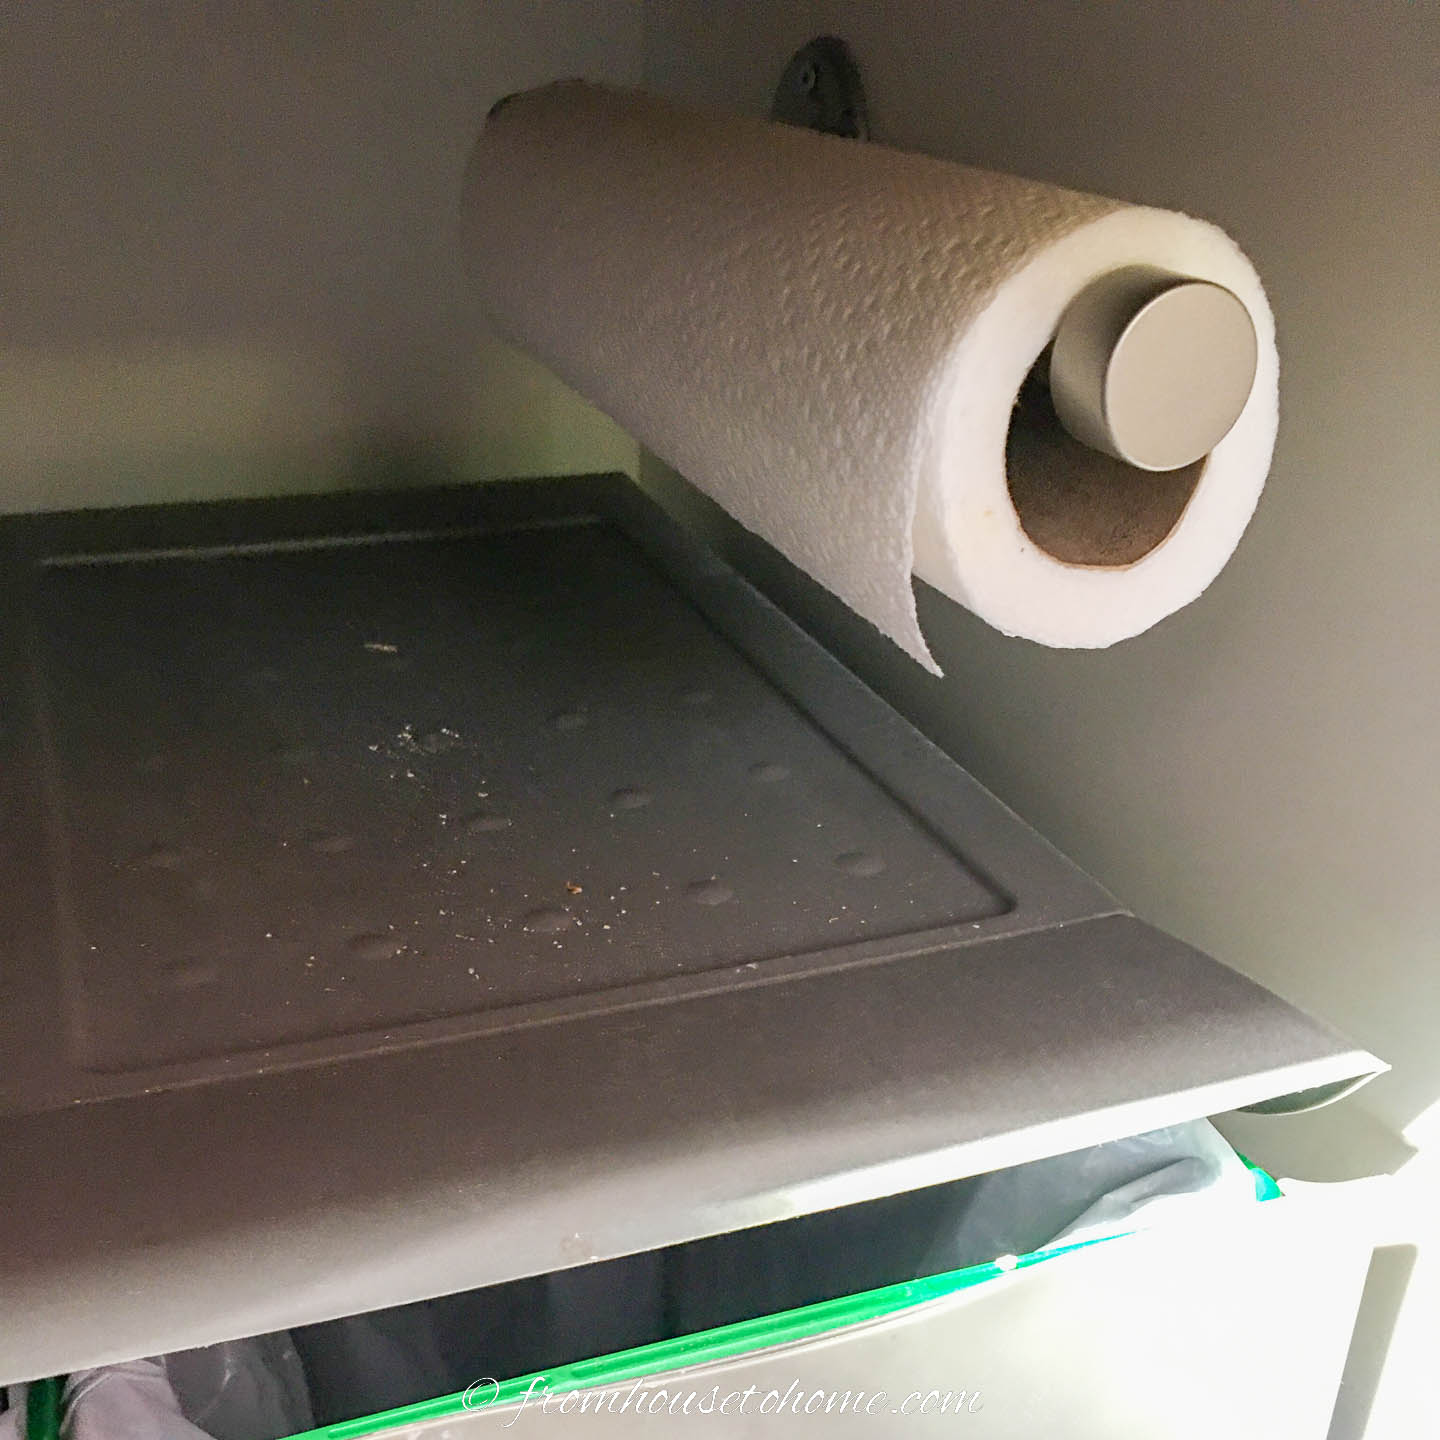 Side-mounted paper towel roll inside a kitchen cabinet